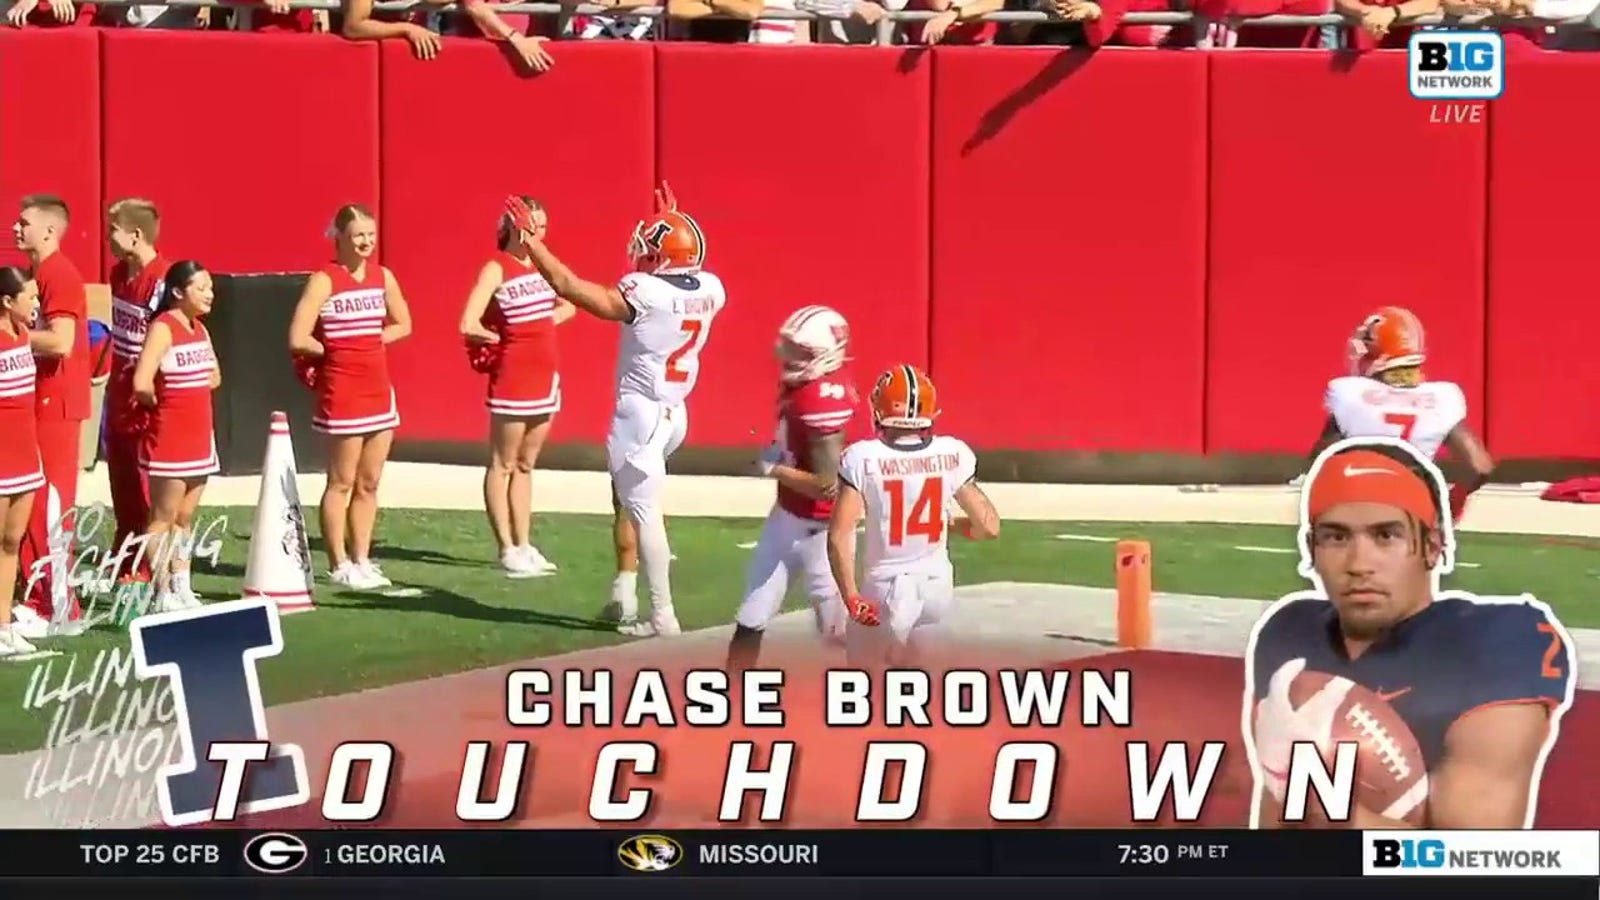 Chase Brown rushes for a long TD